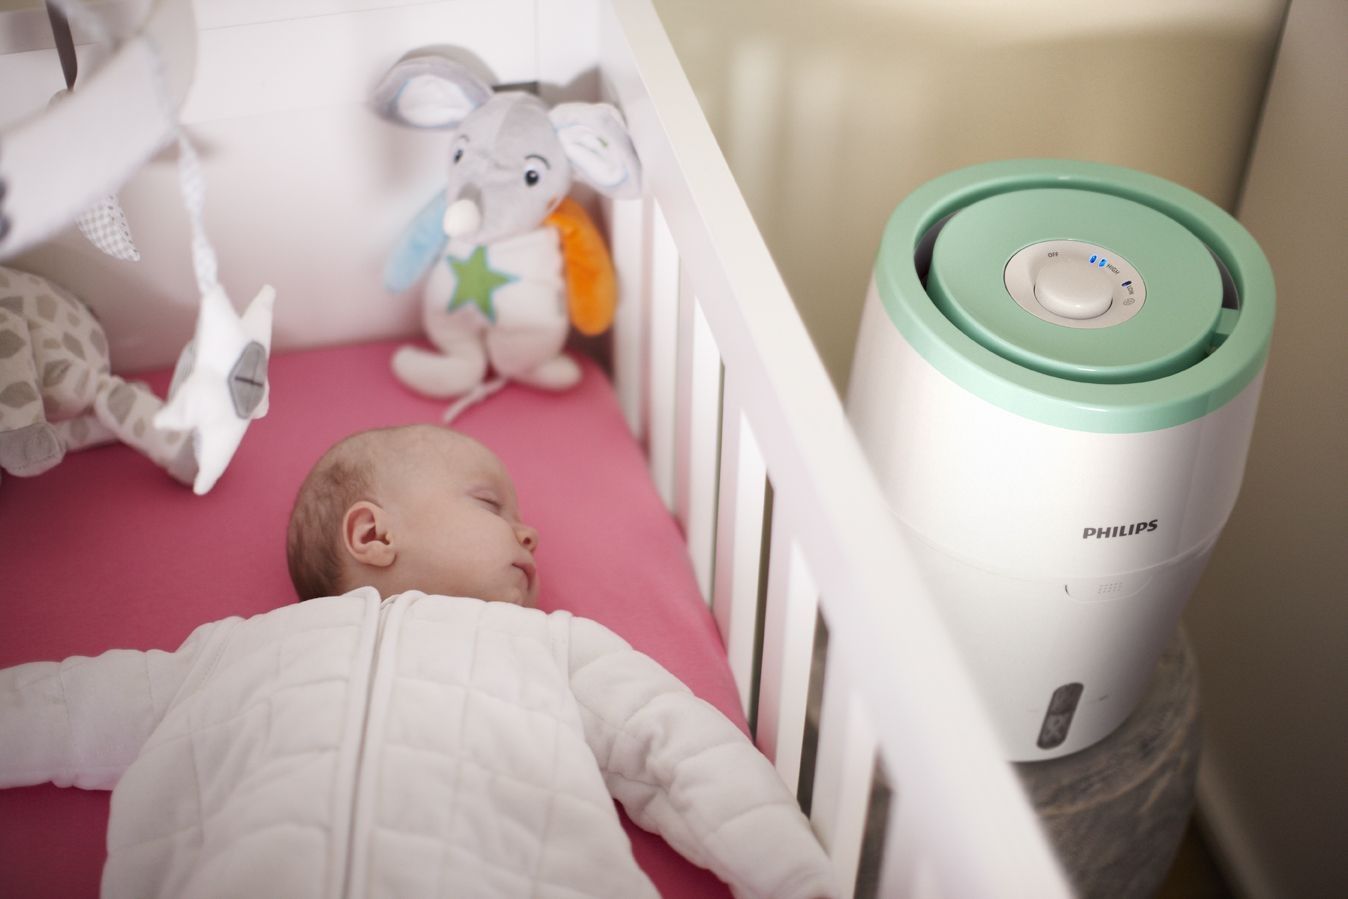 Can I Use Essential Oils In My Baby’s Humidifier